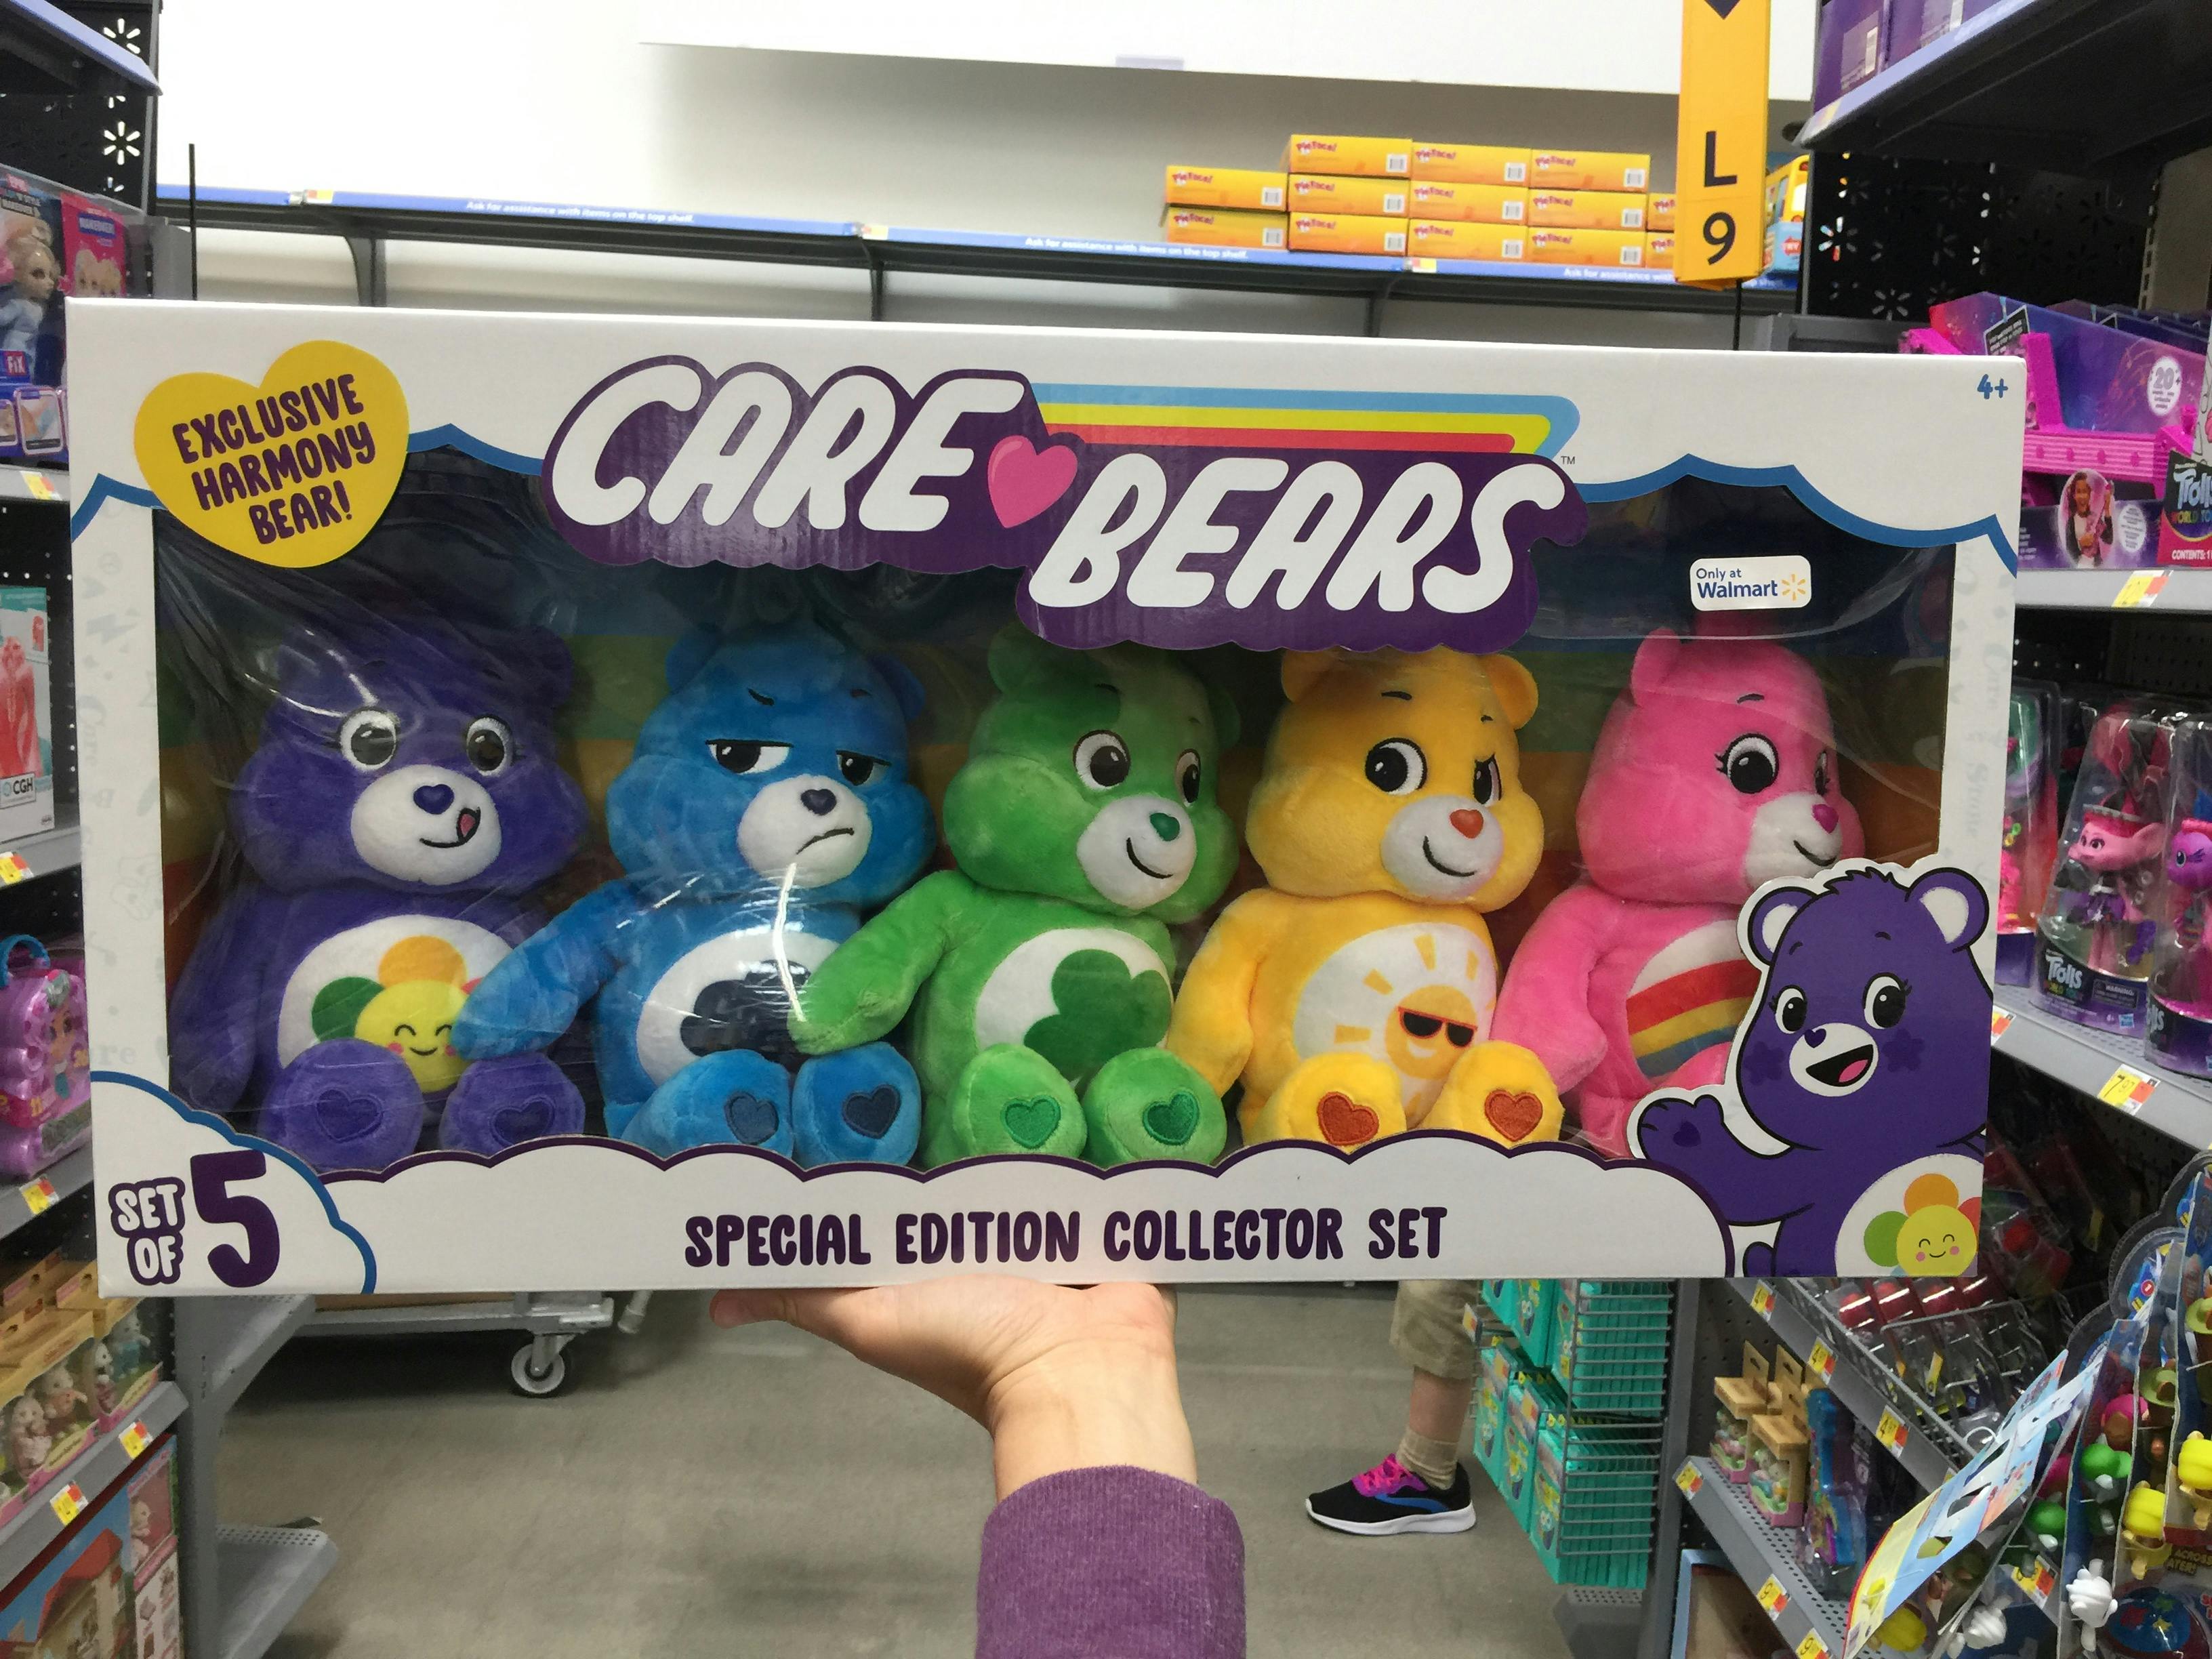 Walmart-Exclusive Care Bears Collector Set Spotted in Stores - The Krazy Coupon Lady